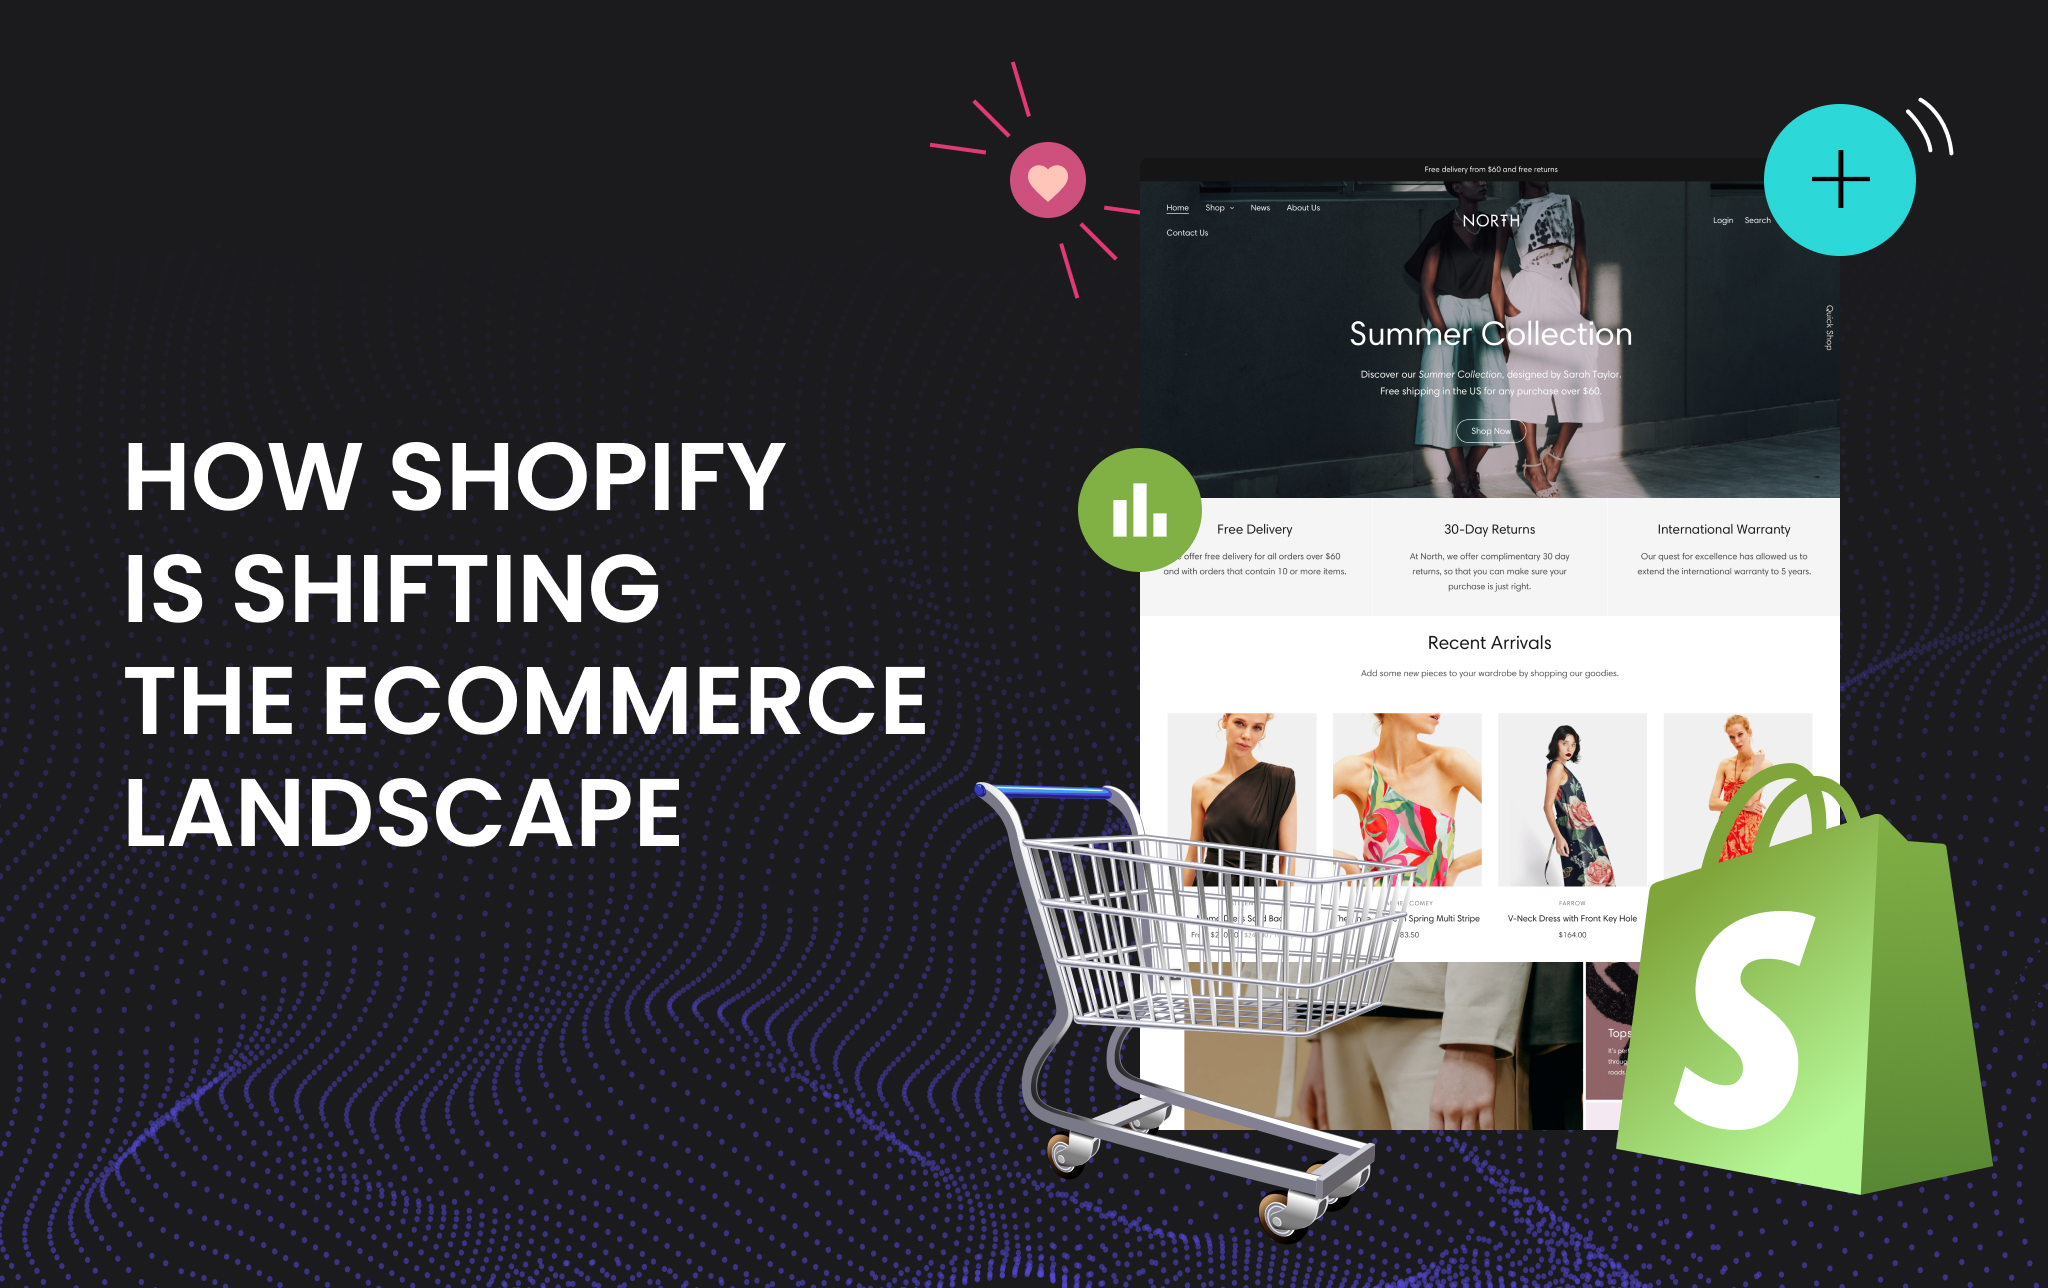 How Shopify is shifting the eCommerce landscape